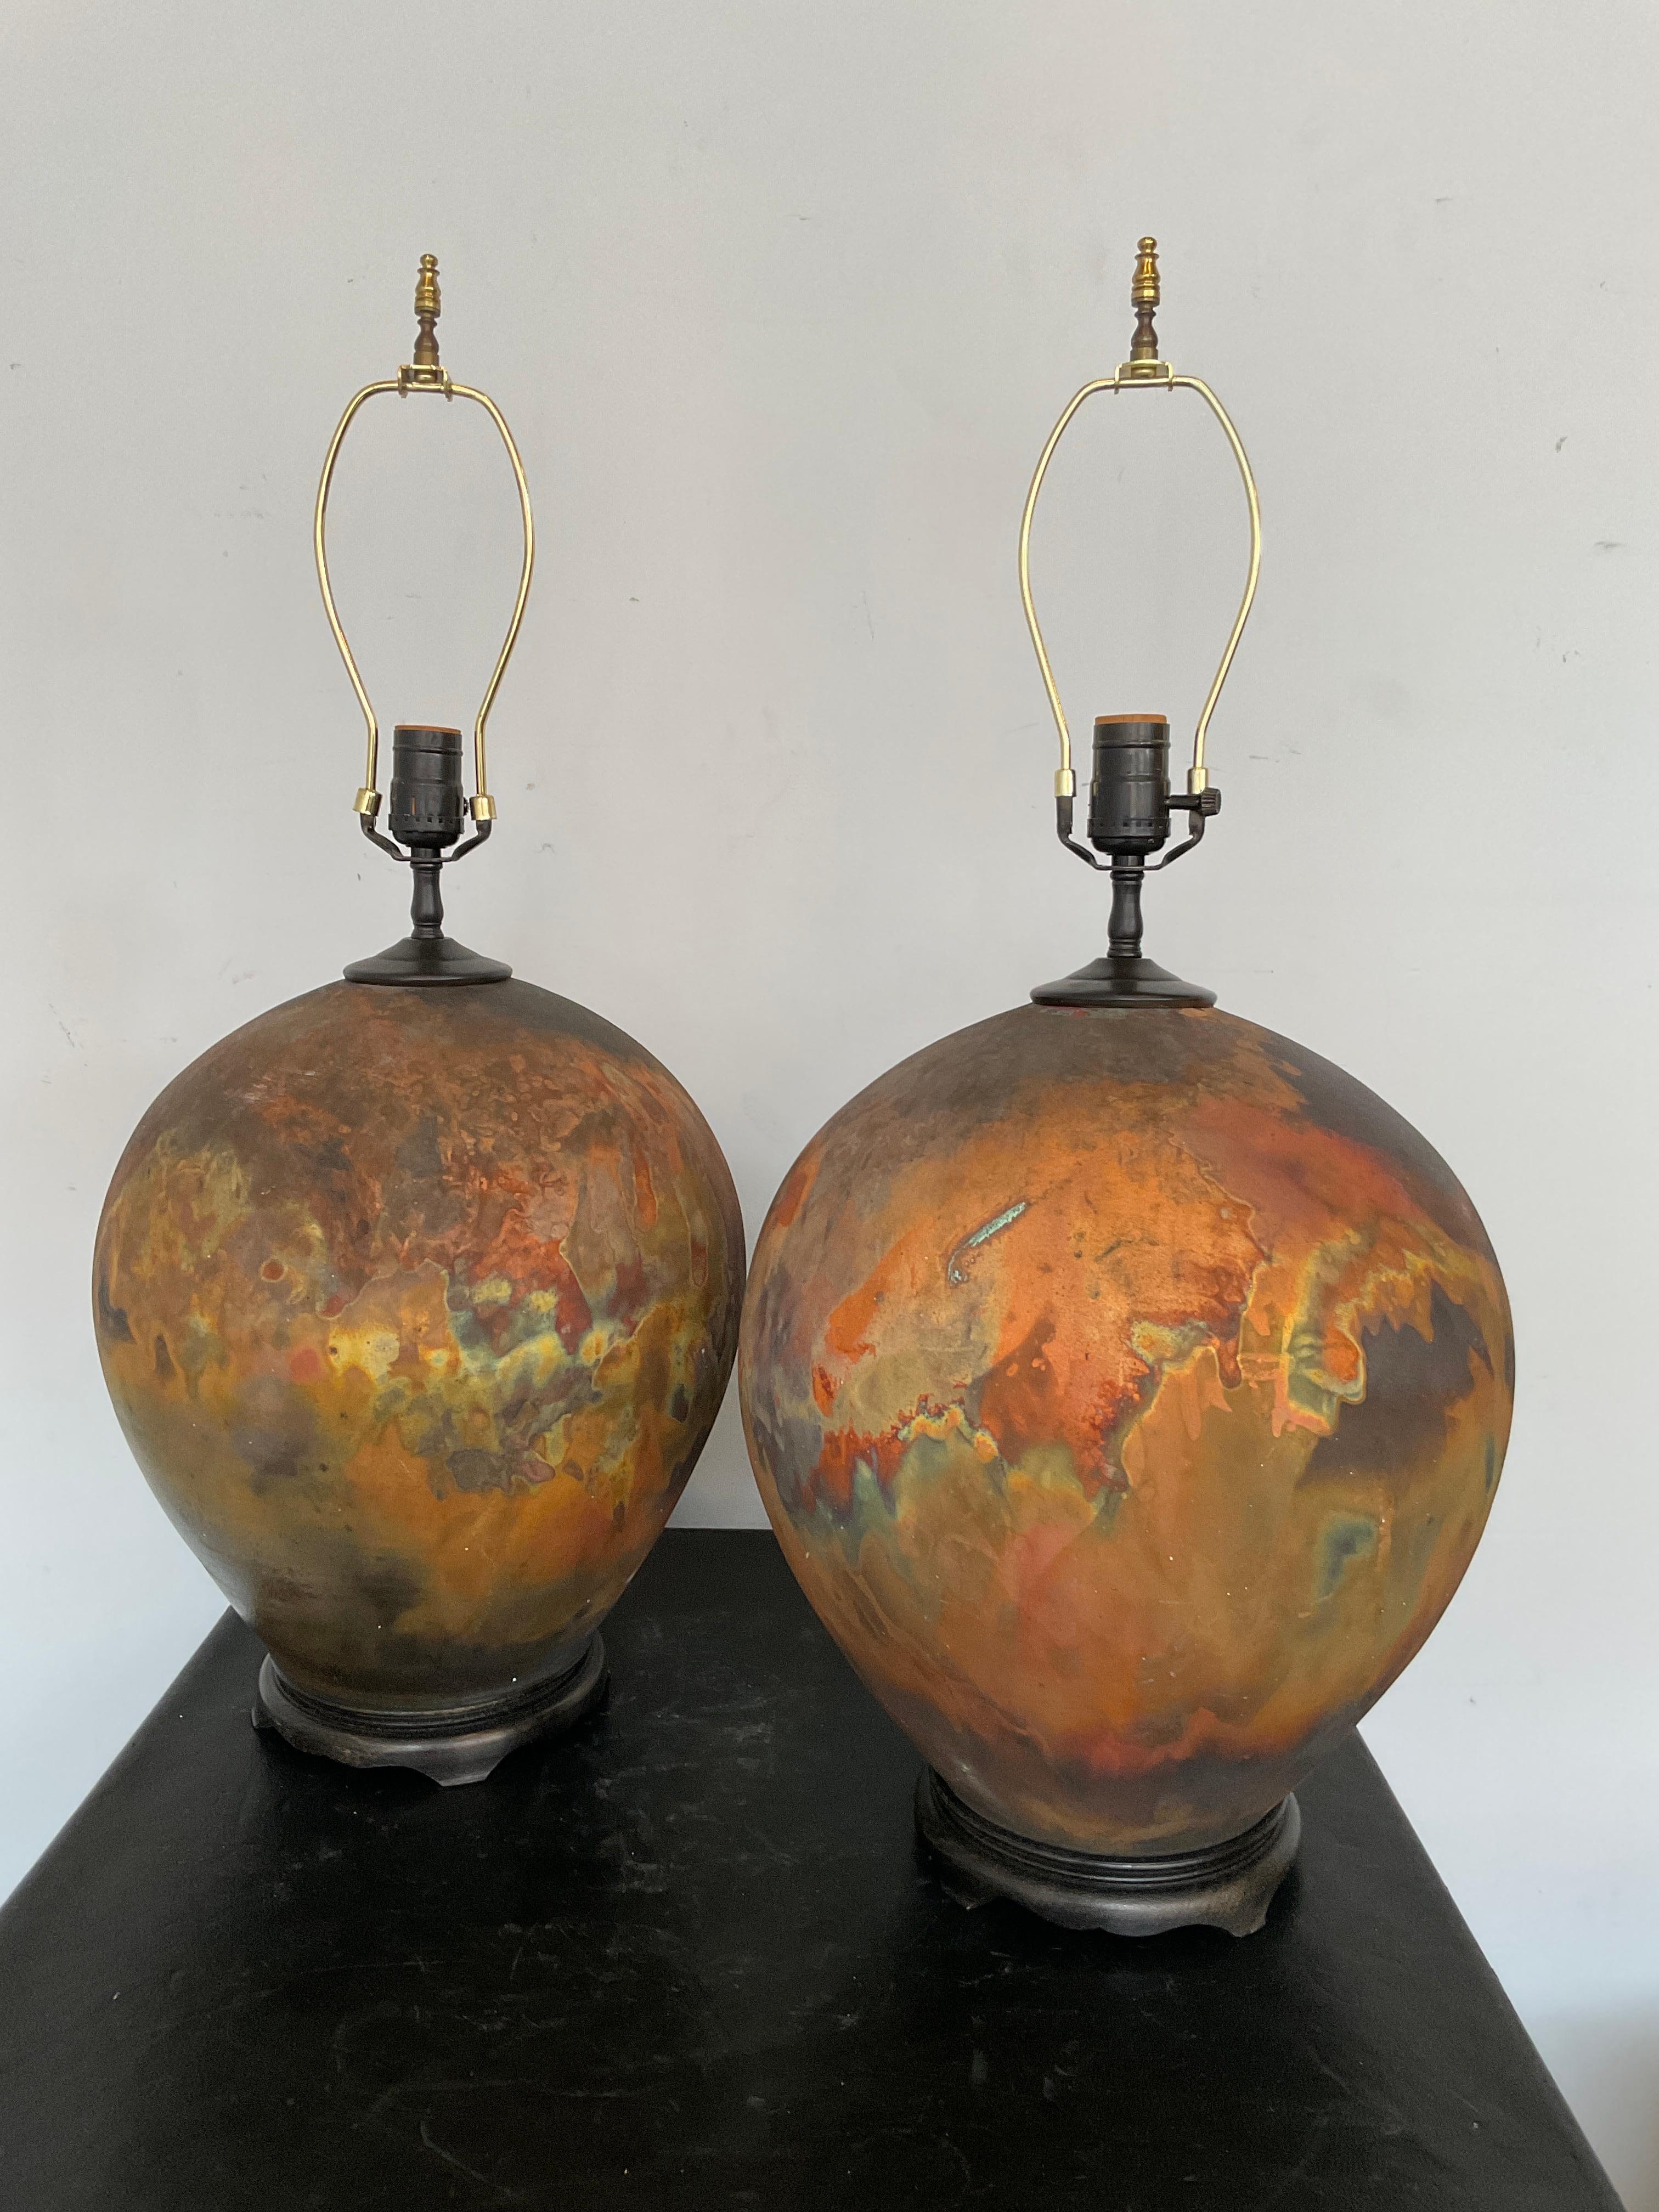 Pair of 1990s ceramic raku multi color lamps. The colors look like 
the ceramics were just taken out of the oven. Love the orange glow.